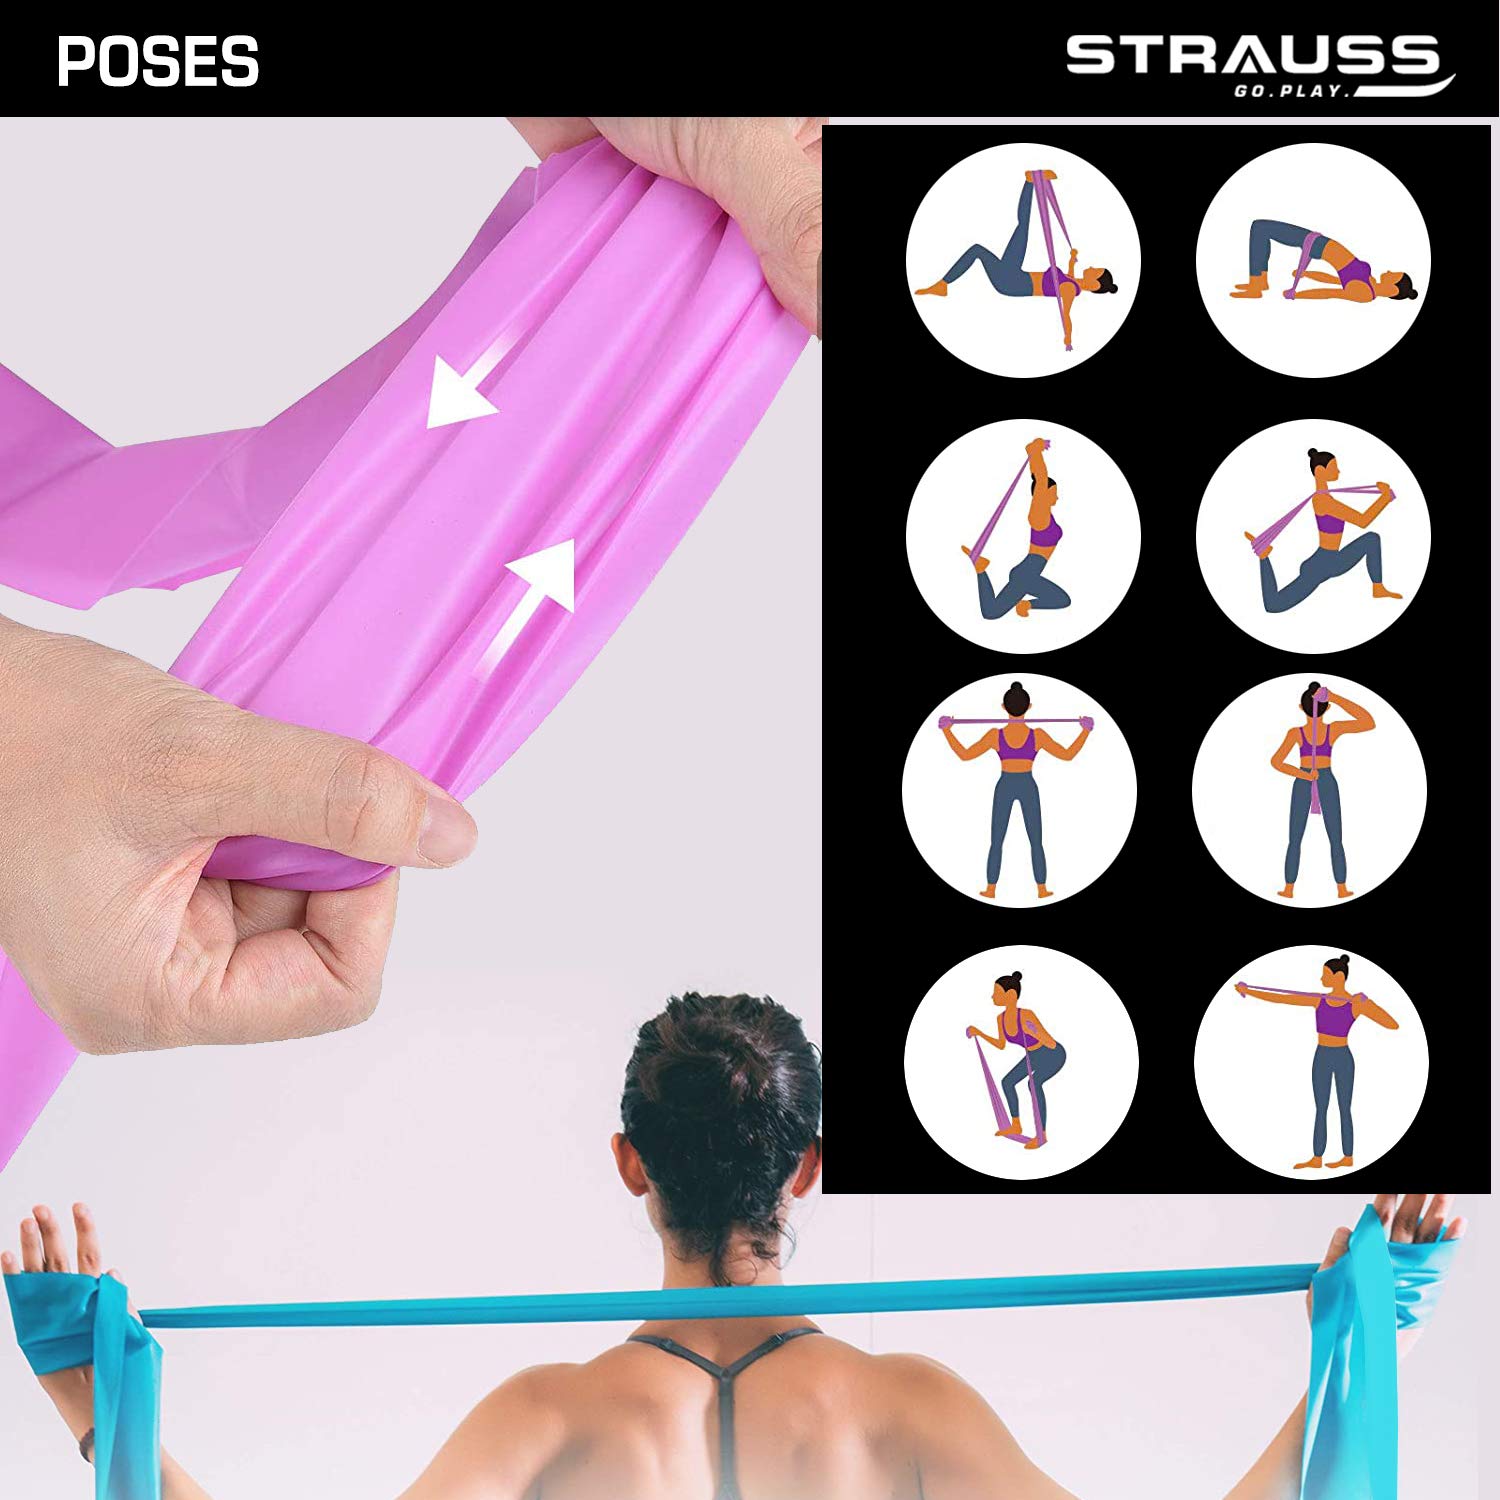 Strauss Yoga Resistance Band, (Multicolor) (Pack of 3) with Gym Ball